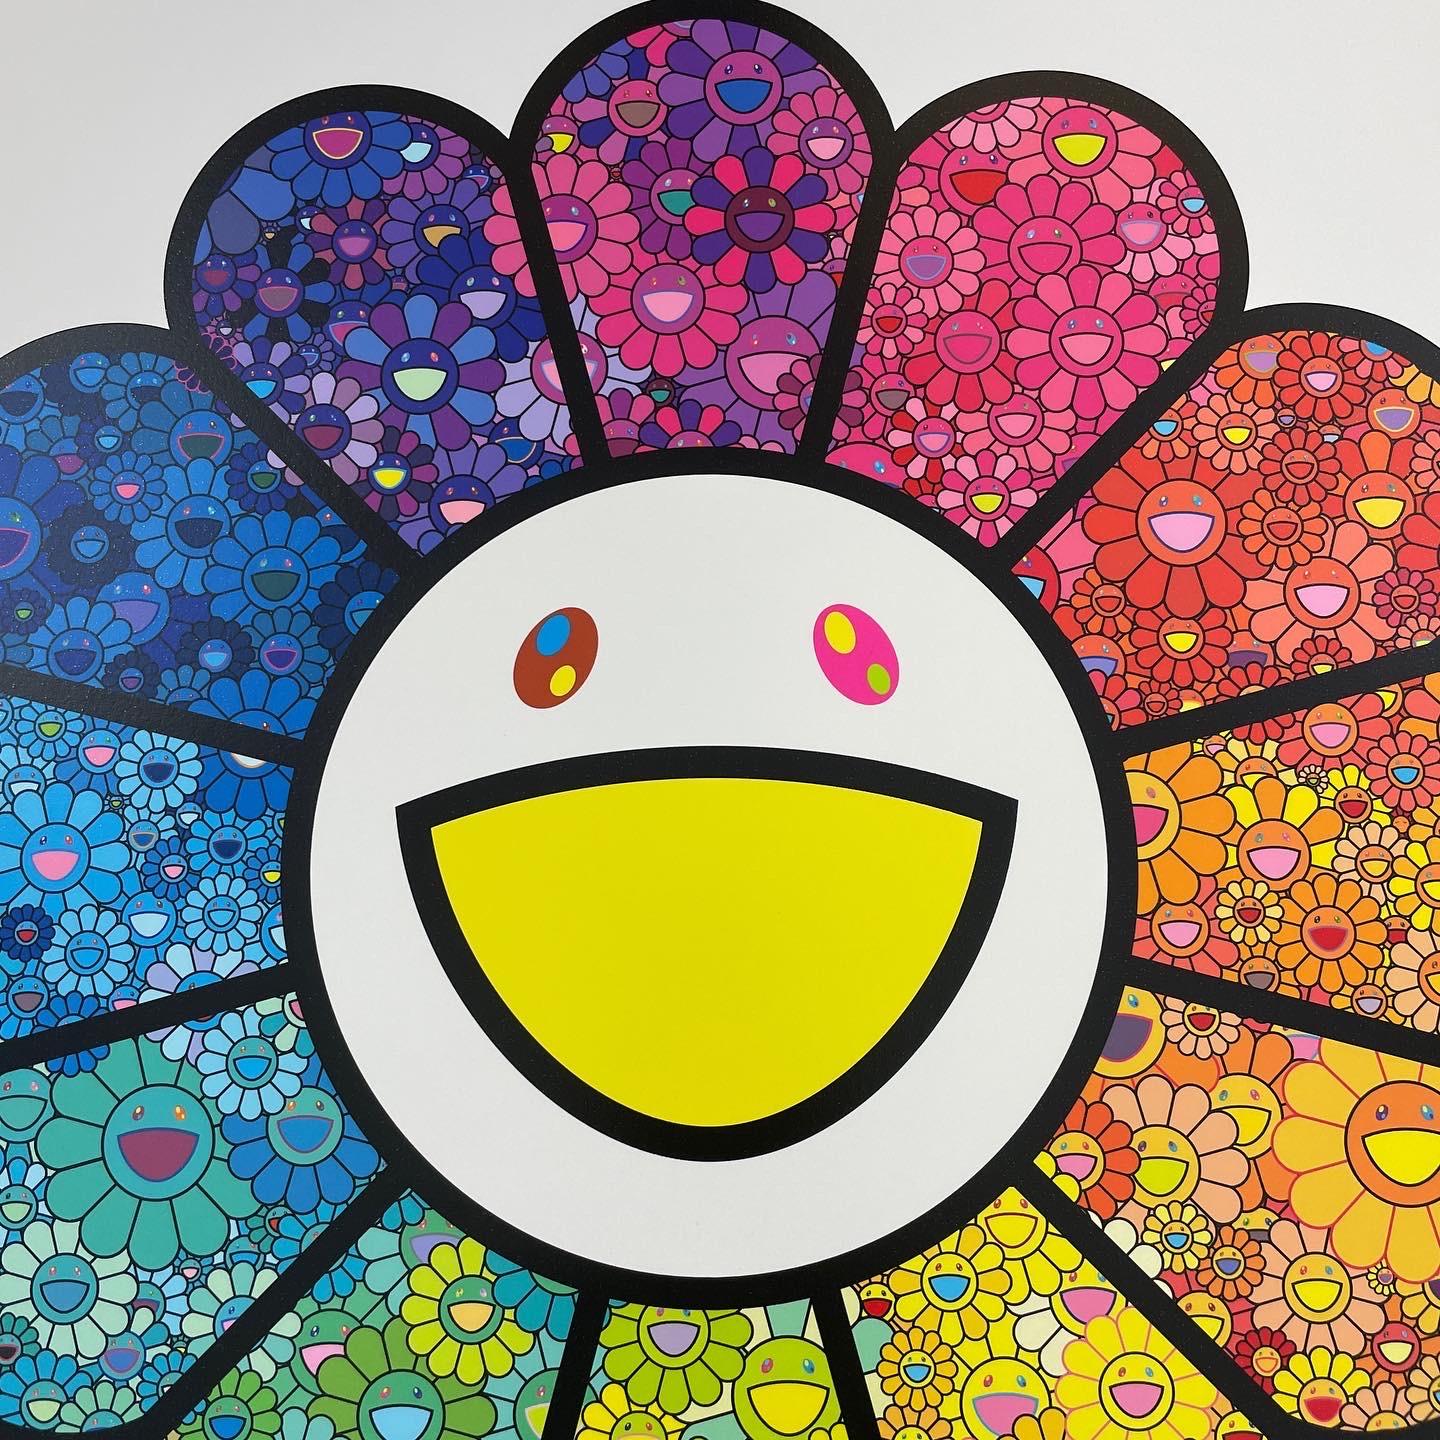 Artist: Takashi Murakami
Title: A Forest Flower
Year: 2021
Edition: 100
Size: 500 x 500mm (sheet size)
Medium: Archival Pigment Print + Silkscreen

This is hand signed by Takashi Murakami.

Note: This will be shipped from Japan so the buyer is